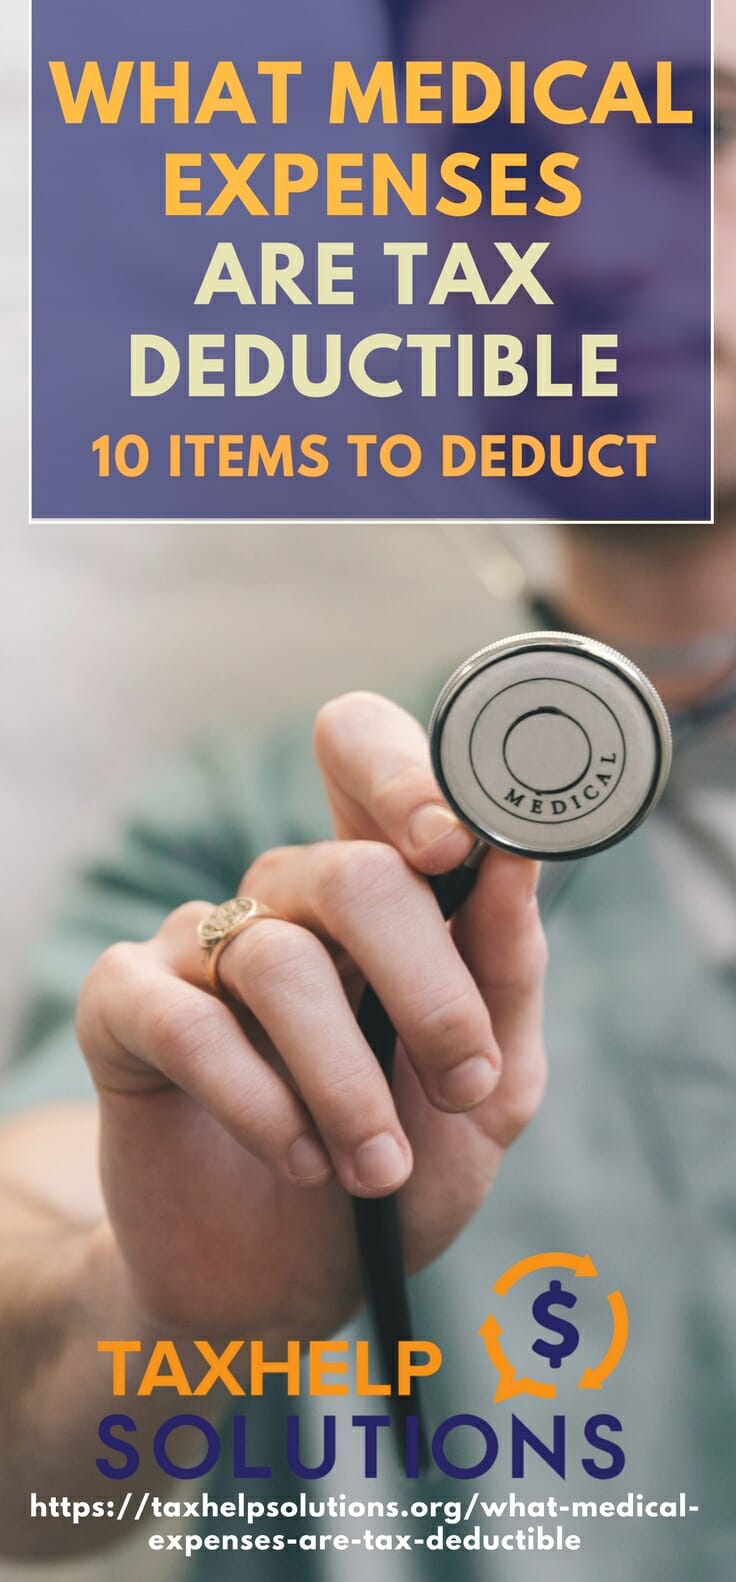 do deductible medical expenses include premiums